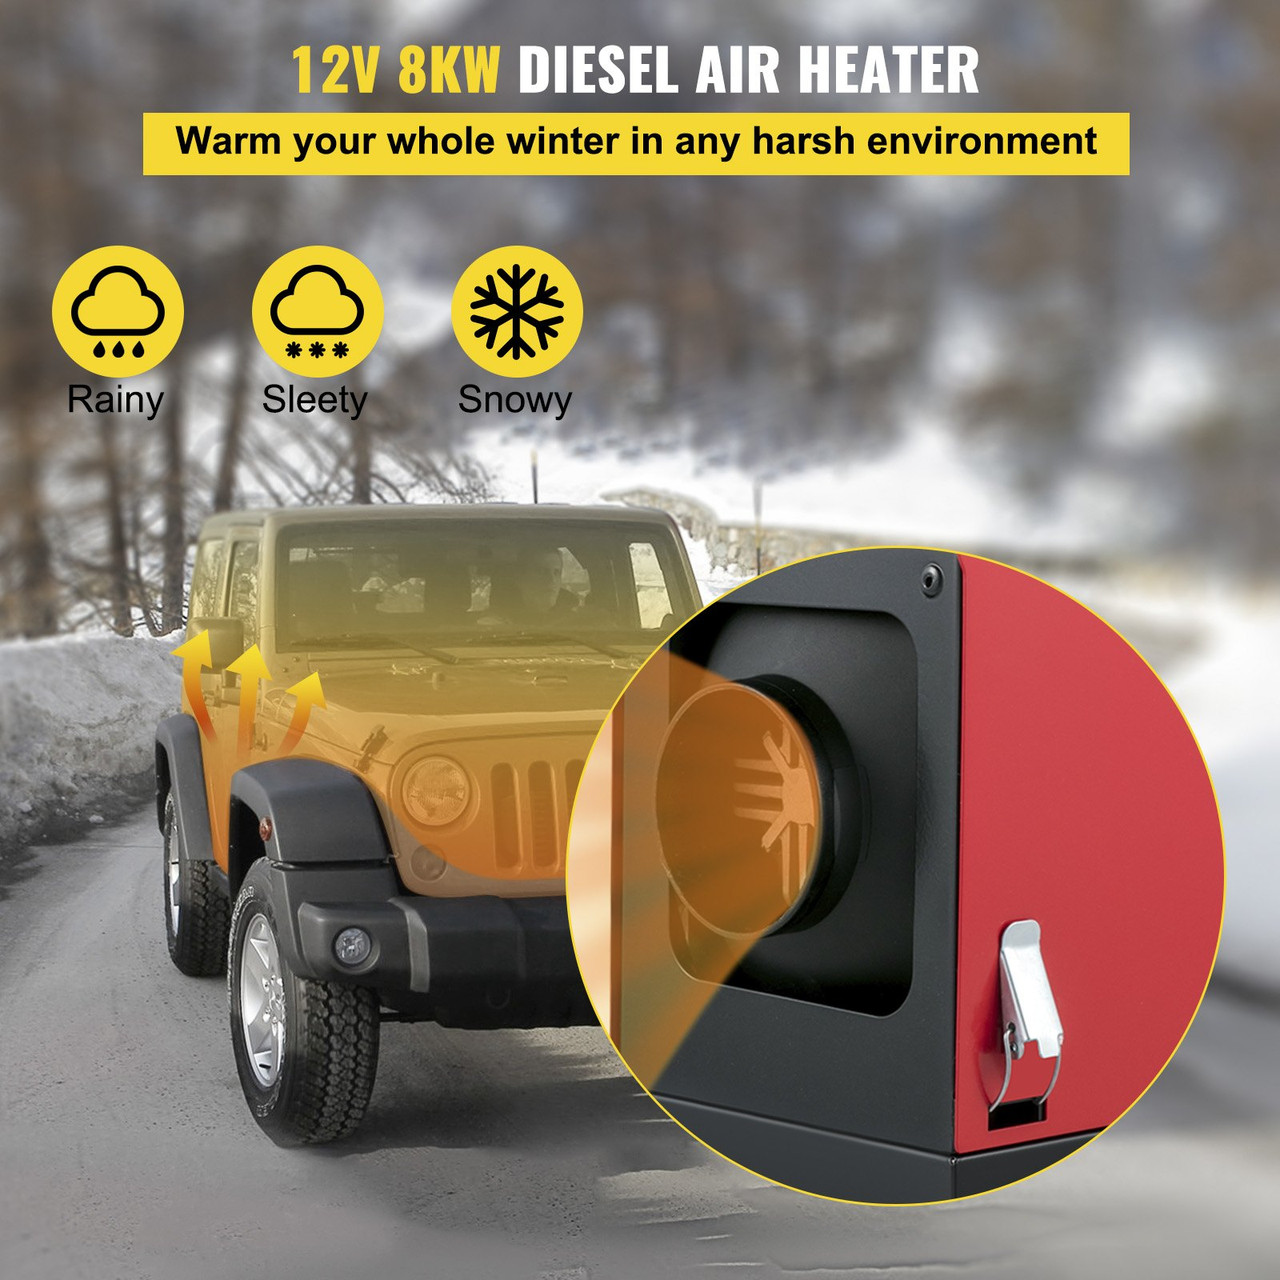 VEVOR Diesel Air Heater, 8KW Parking Heater, 12V Truck Heater, 1 Outlet  Hole, with Knob Switch, Remote Control, Fast Heating Diesel Heater, For RV  Truck, Boat, Bus, Car Trailer, Motorhomes, Caravans 